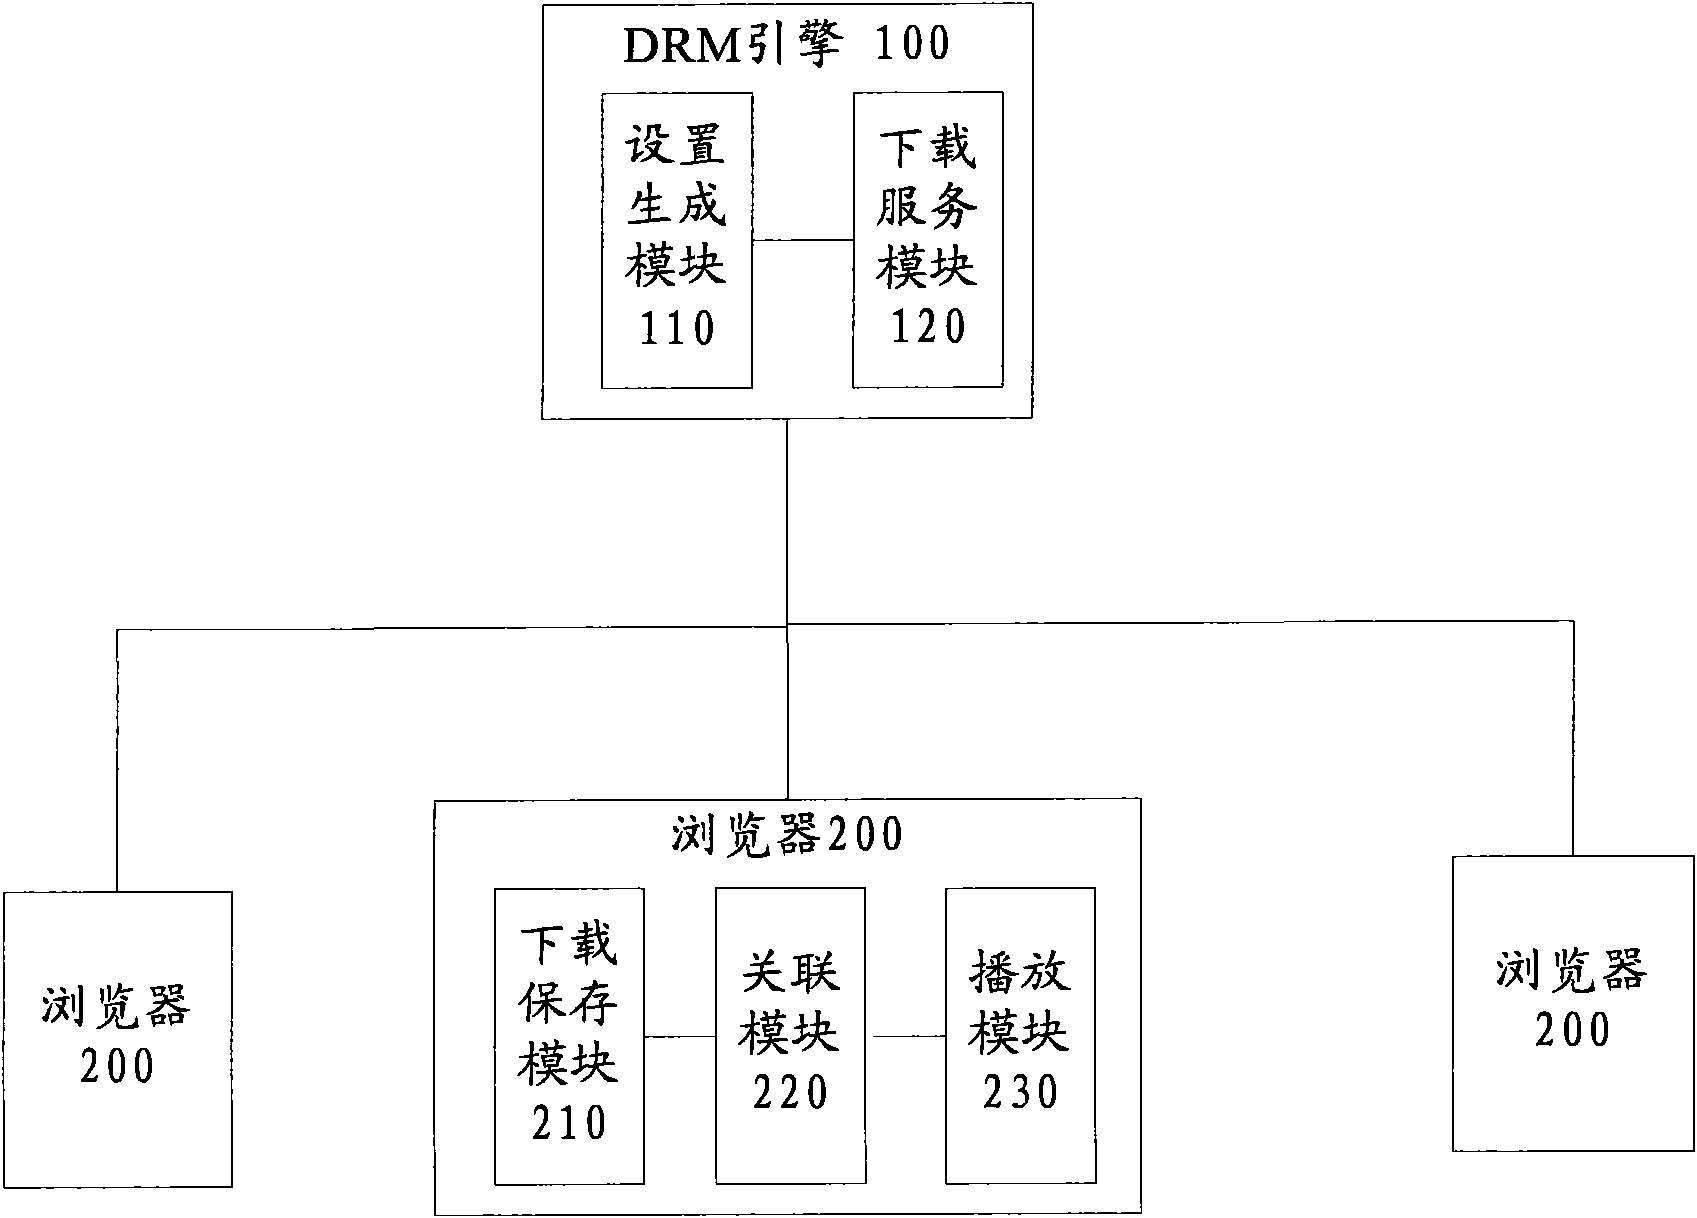 Method and system for processing DRM file